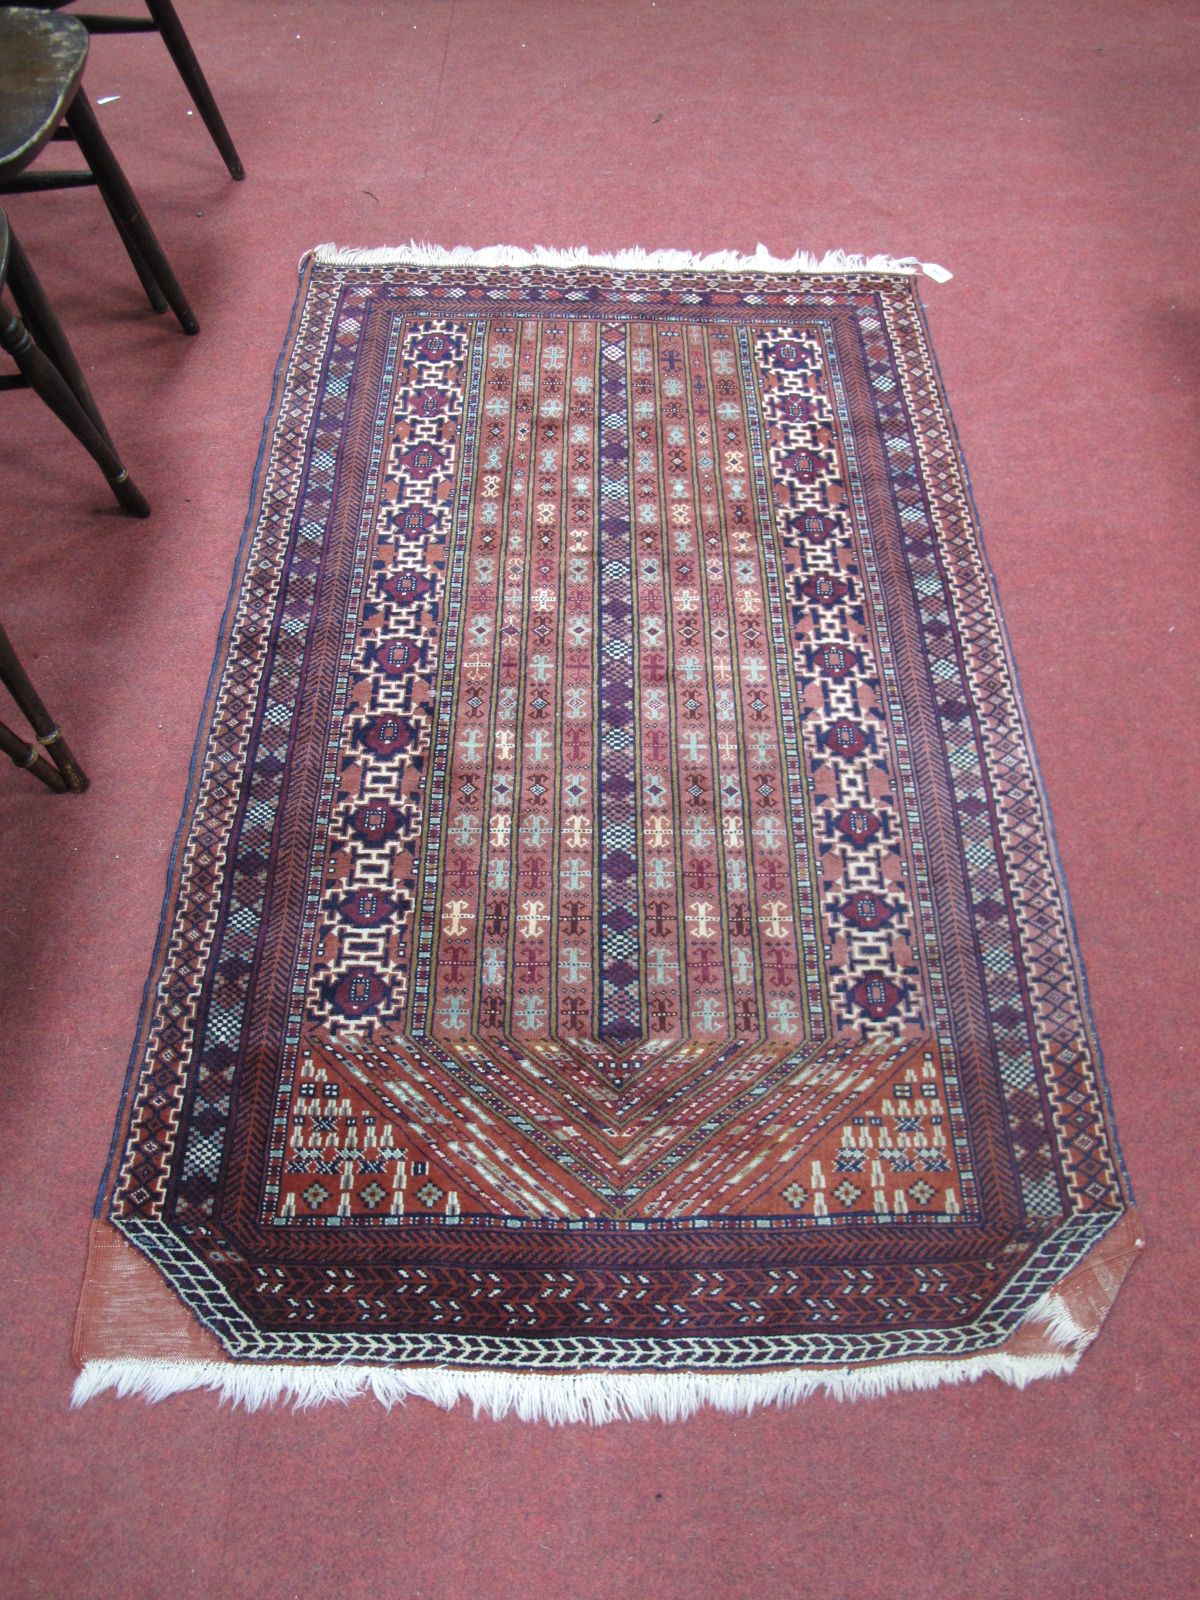 A Middle Eastern Tasseled Rug, centrally decorated with stylized geometric rows within multi